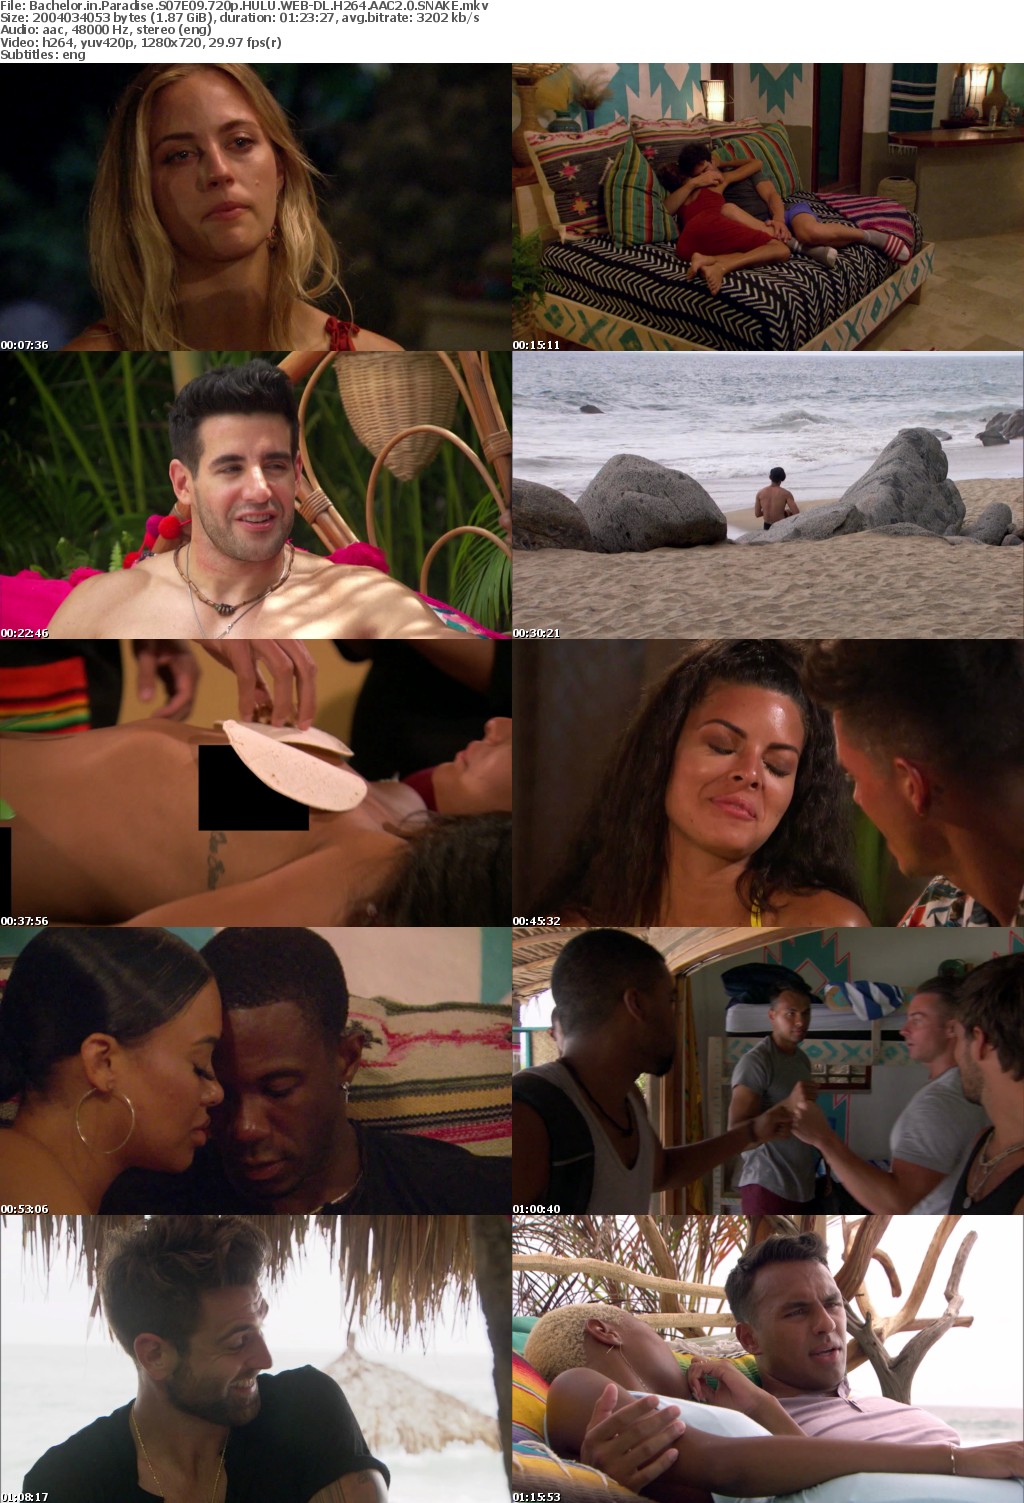 Bachelor in Paradise S07E09 720p HULU WEB-DL H264 AAC2 0 SNAKE